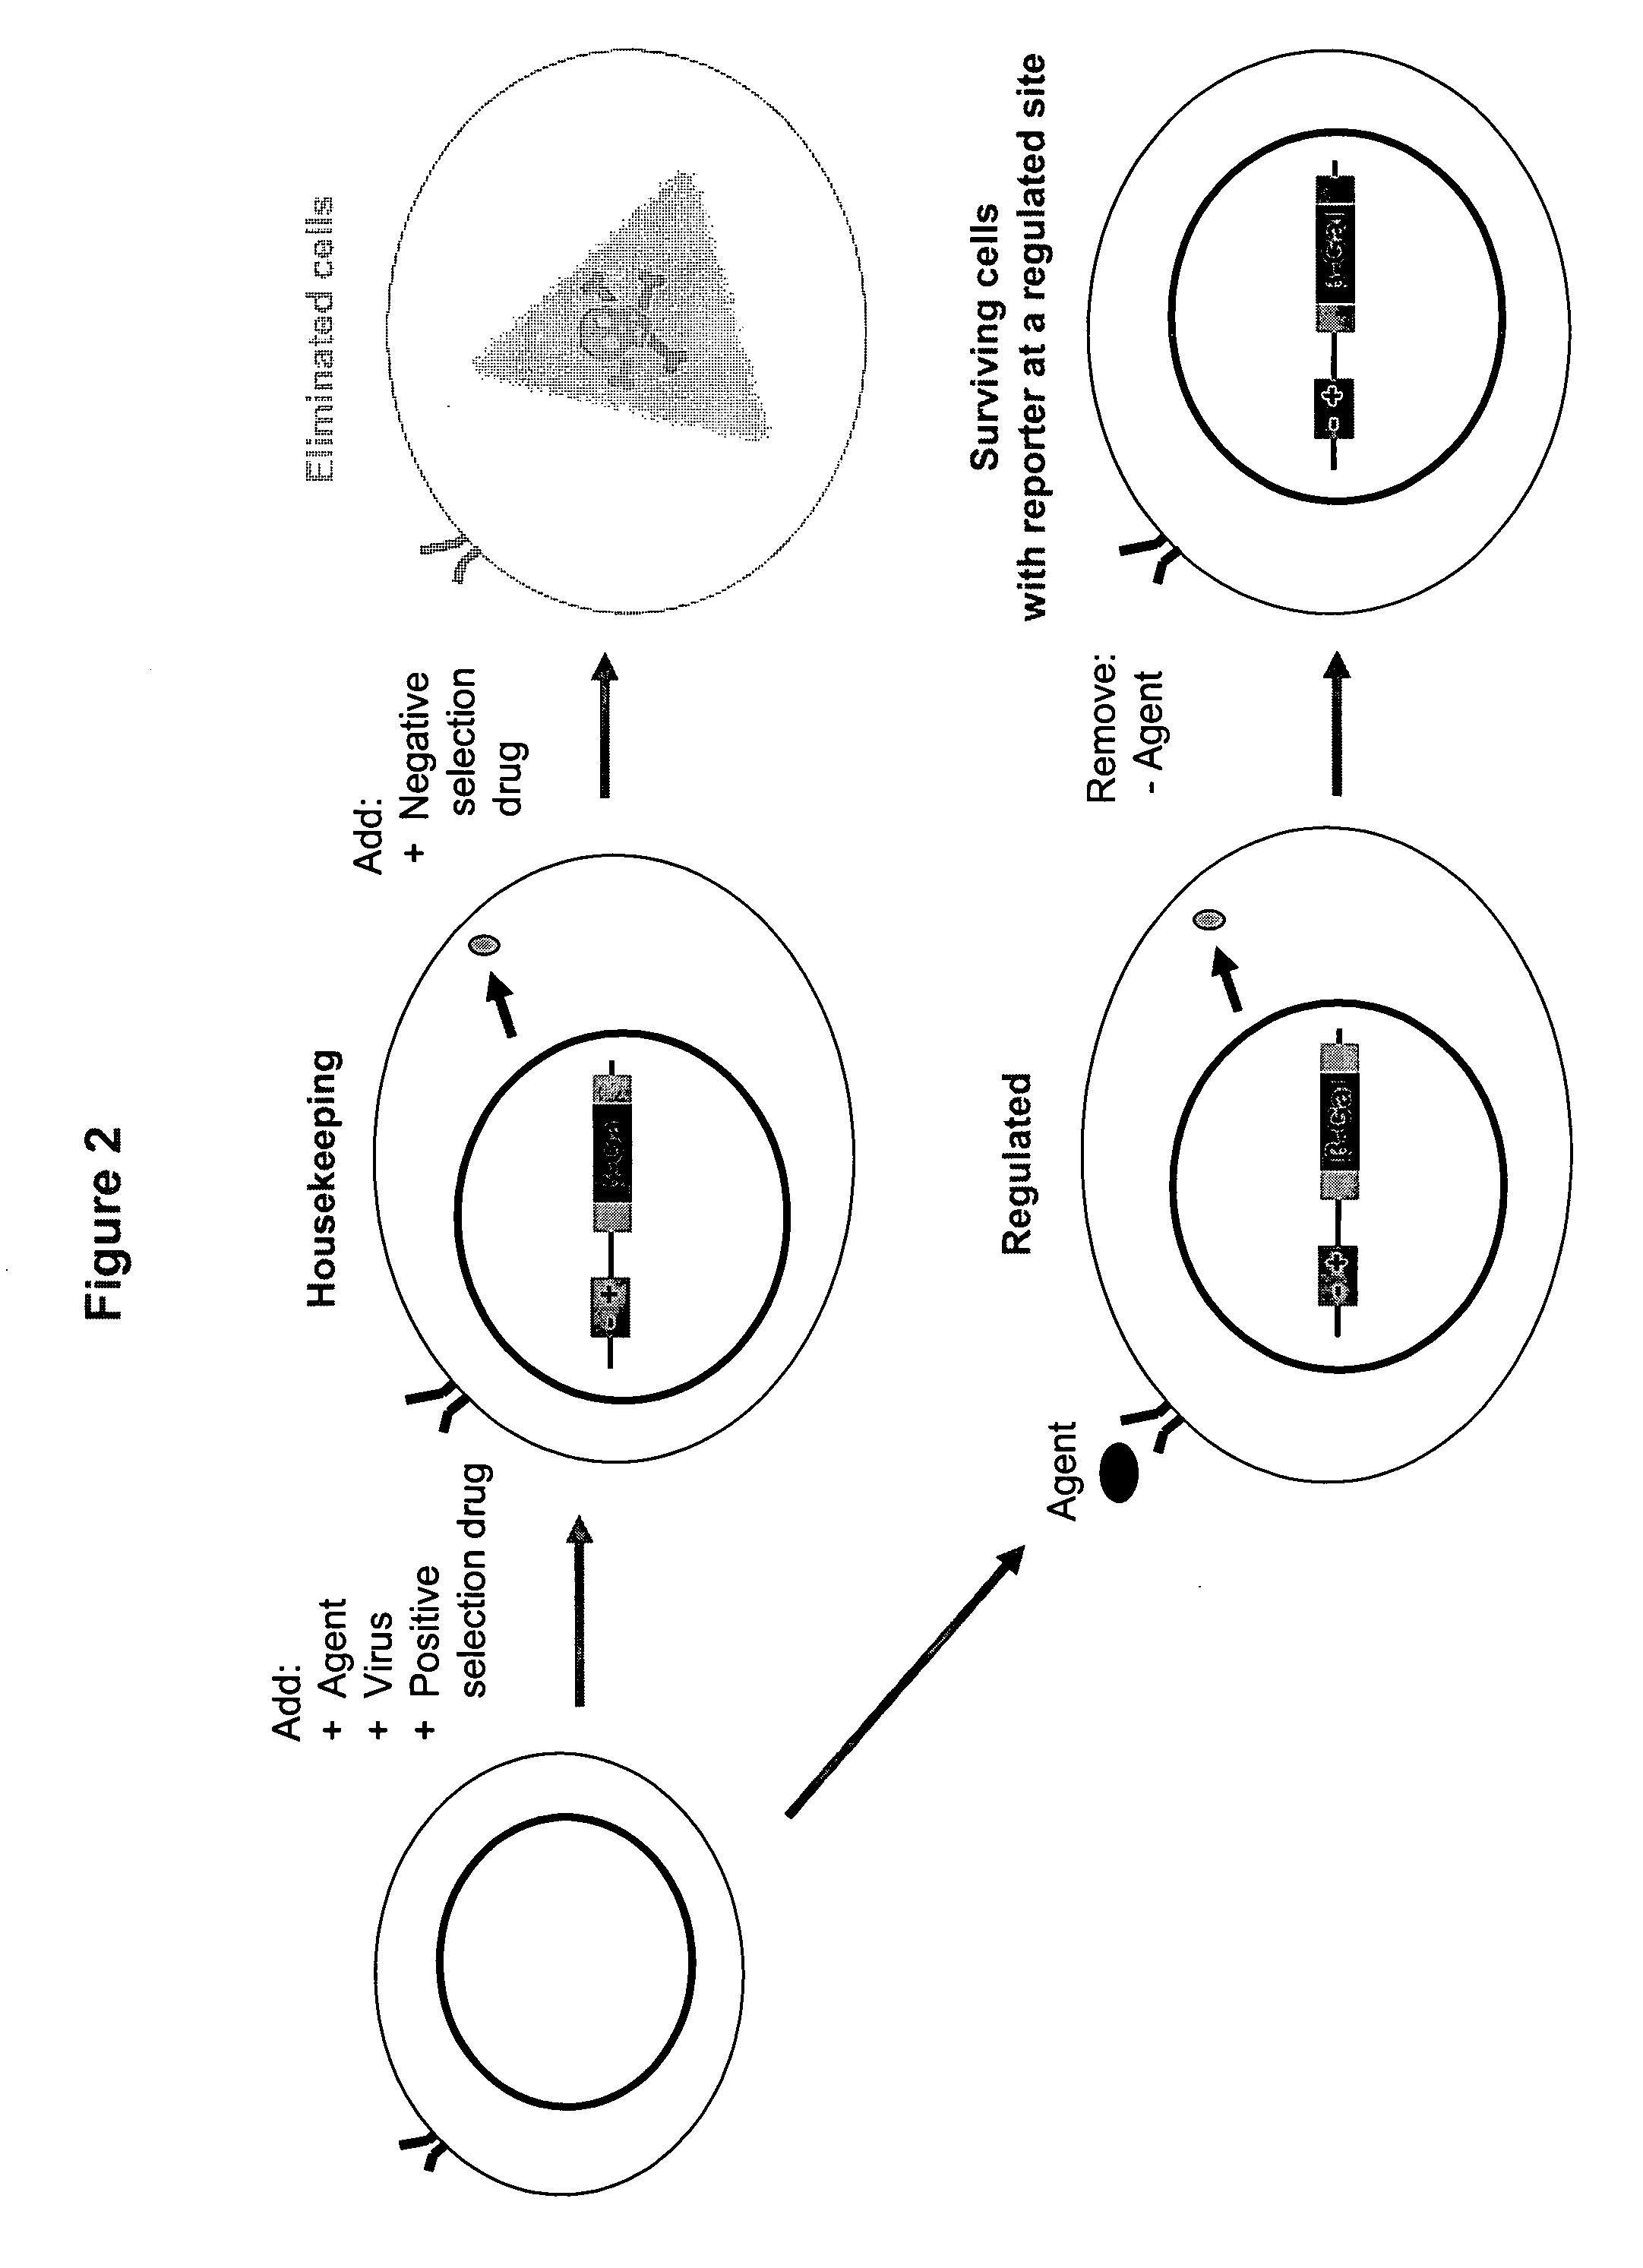 Treatment of refractory cancers using NA+/K+ ATPase inhibitors